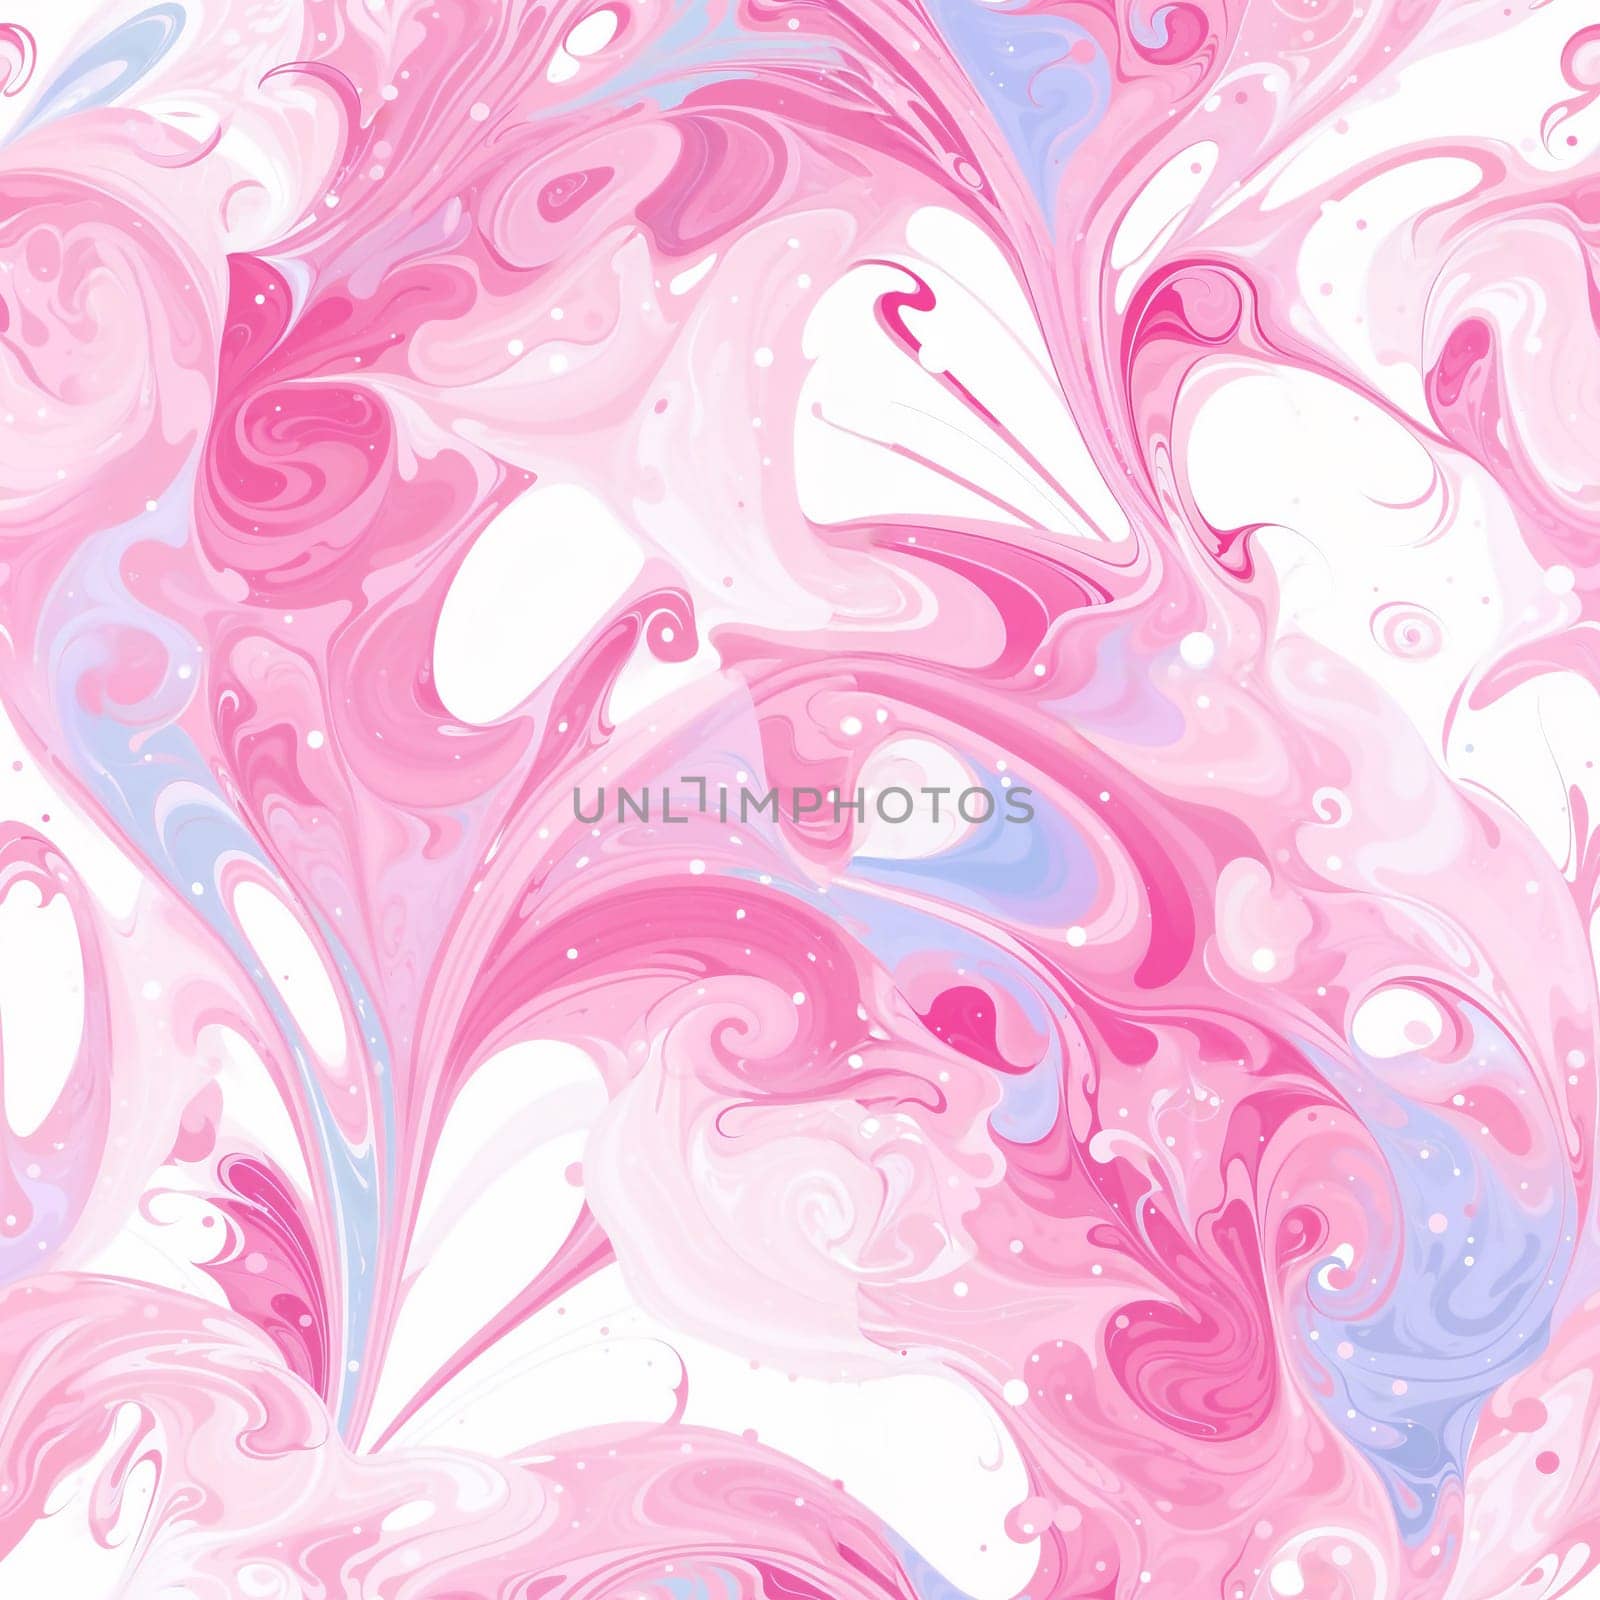 A pattern featuring a mix of pink and blue marble textures on a white background. Seamless abstract background. Perfect edge matching